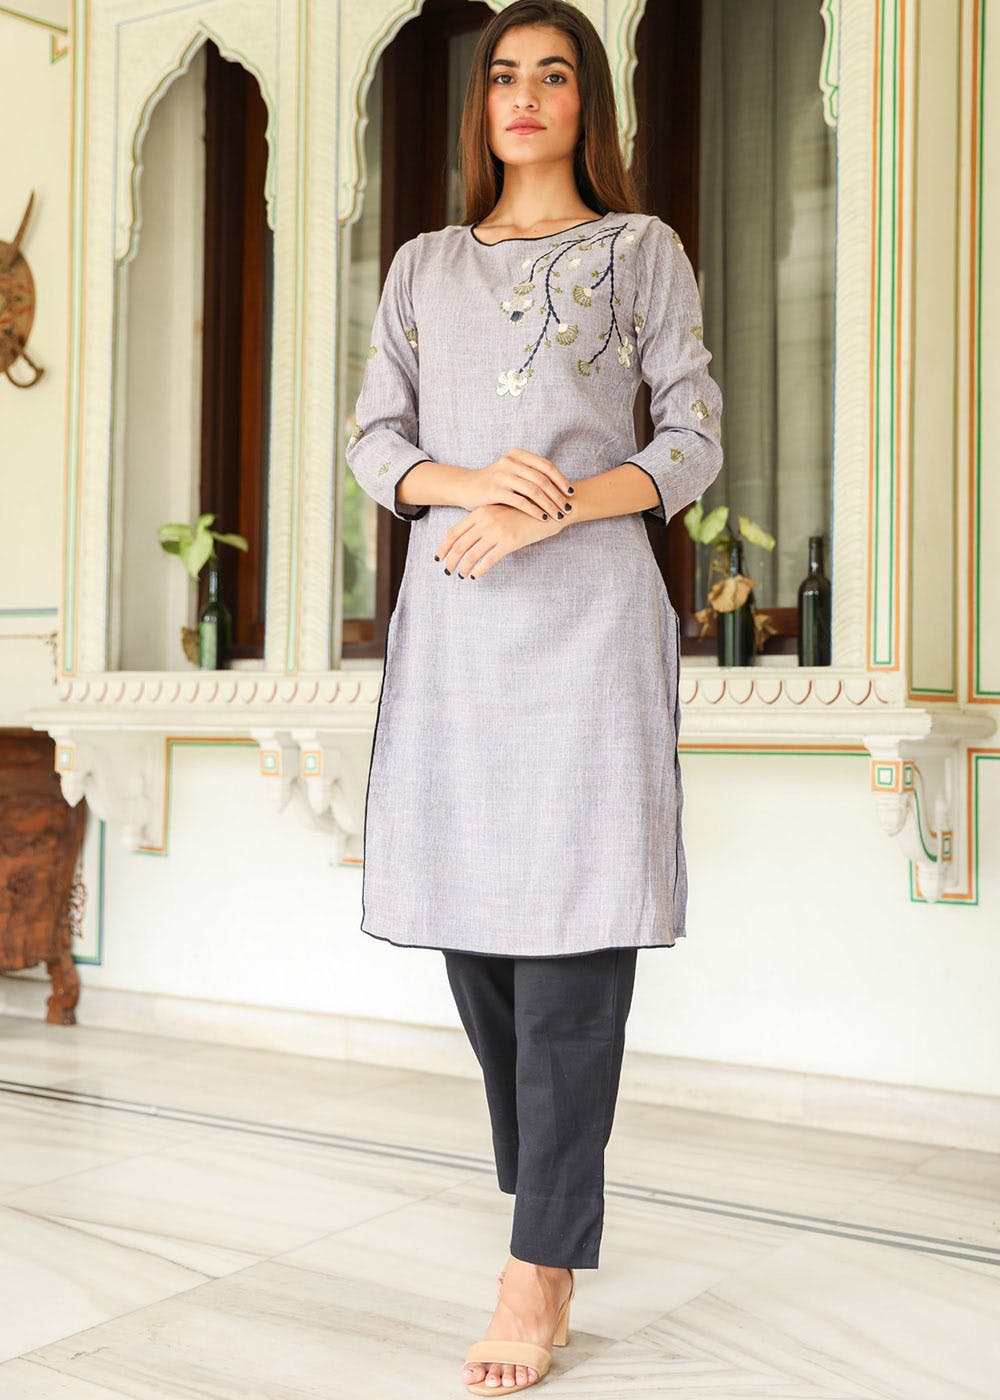 Grey Color Georgette And Crepe Kurti With Bottom